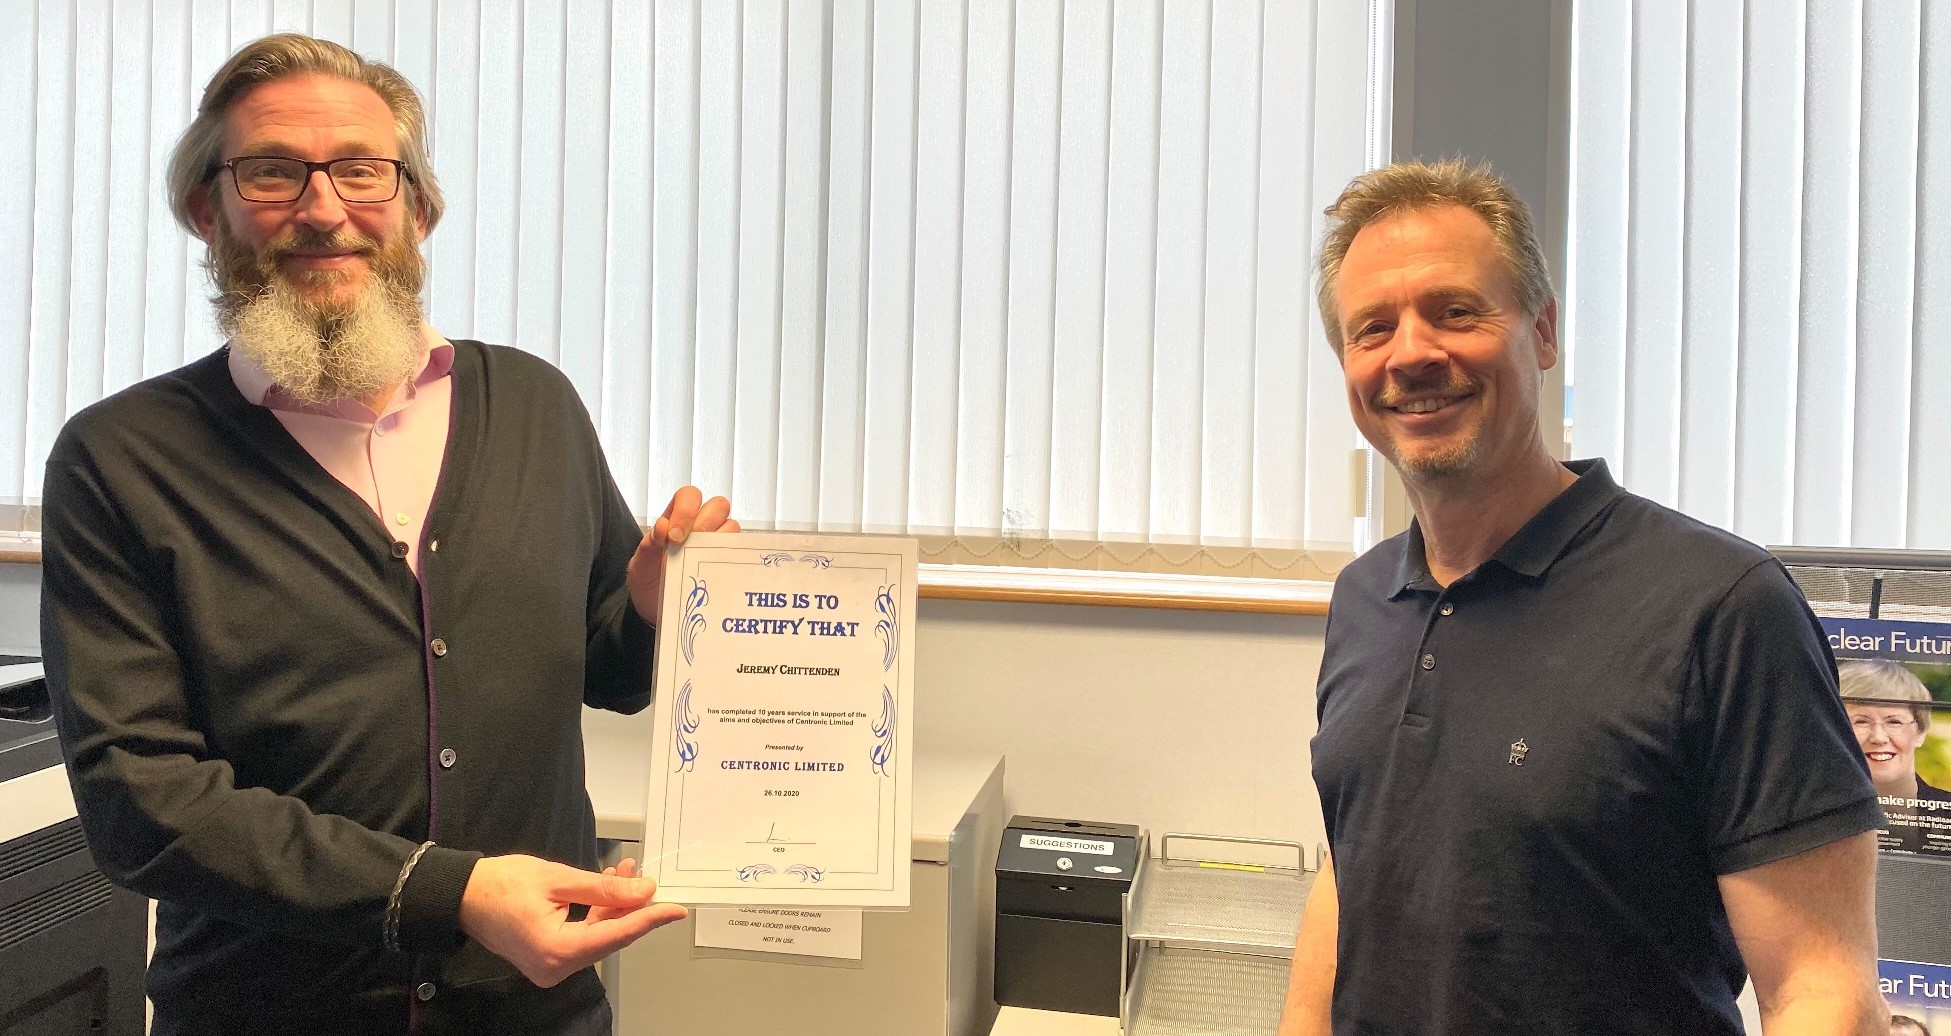 Jeremy Chittenden celebrates 10 years service with Centronic!